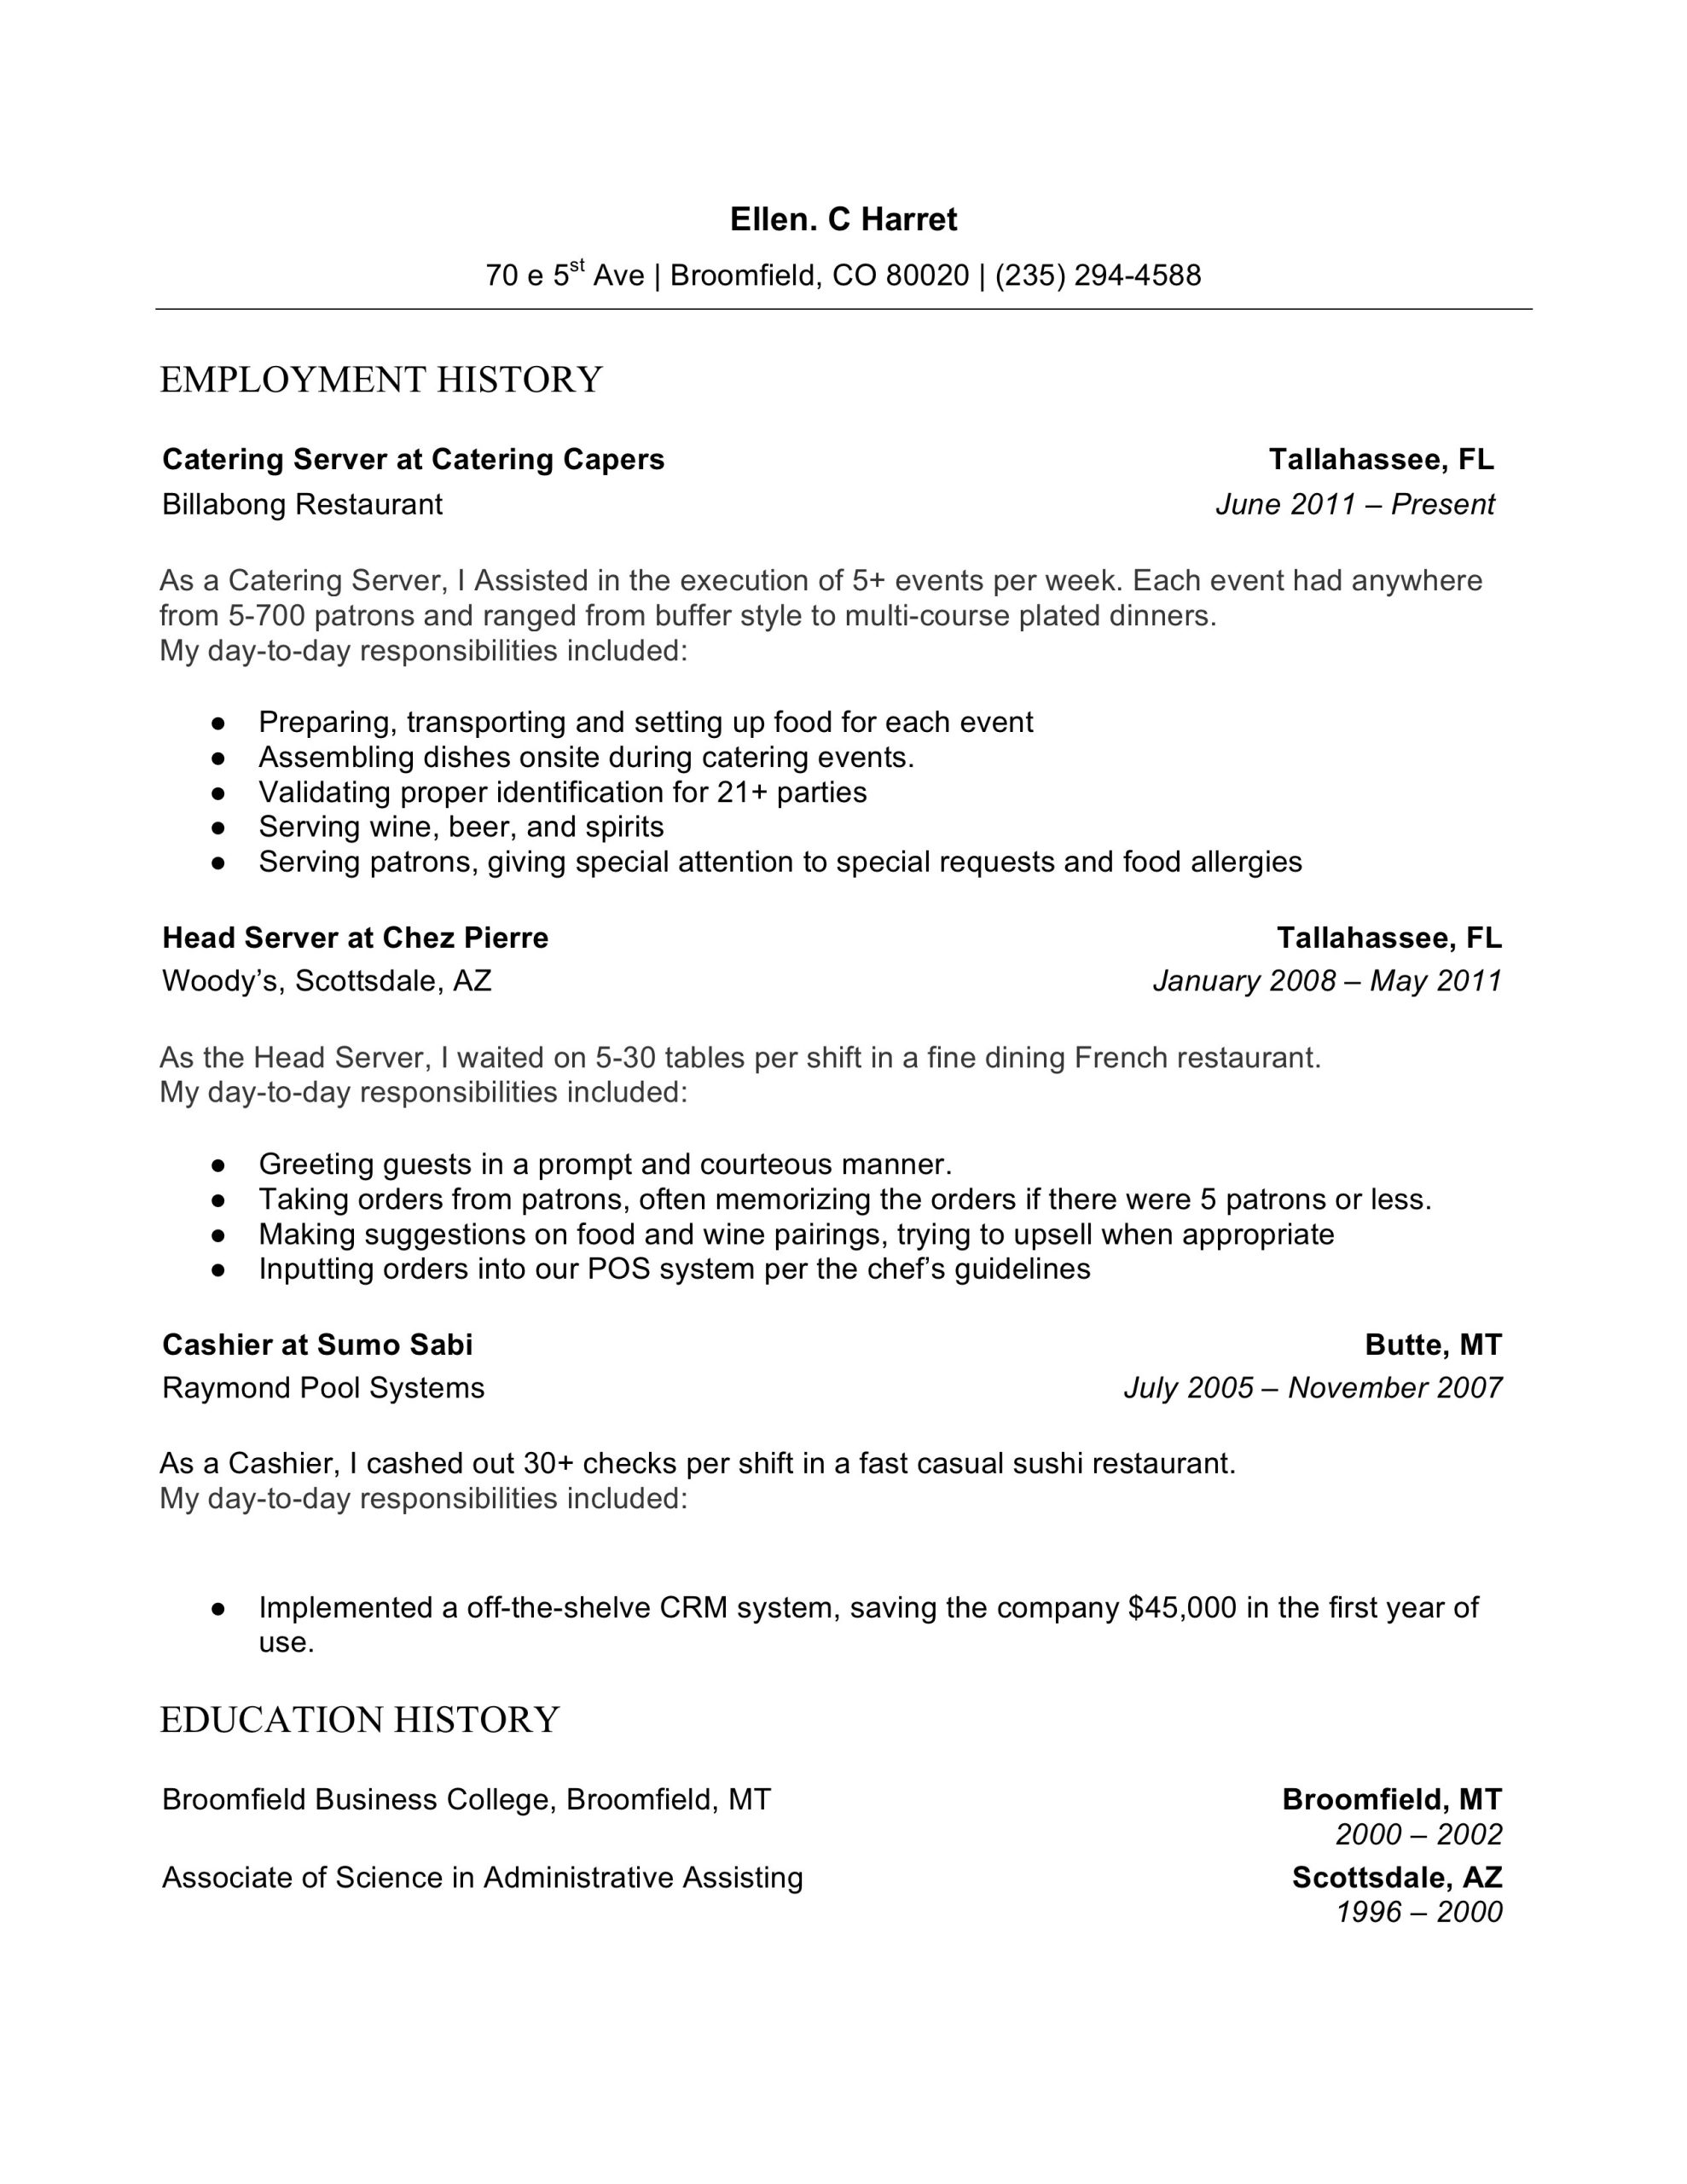 Sample Of Functional and Chronological Resume Combined Resume formats: Chronological, Functional, & Combo 2020